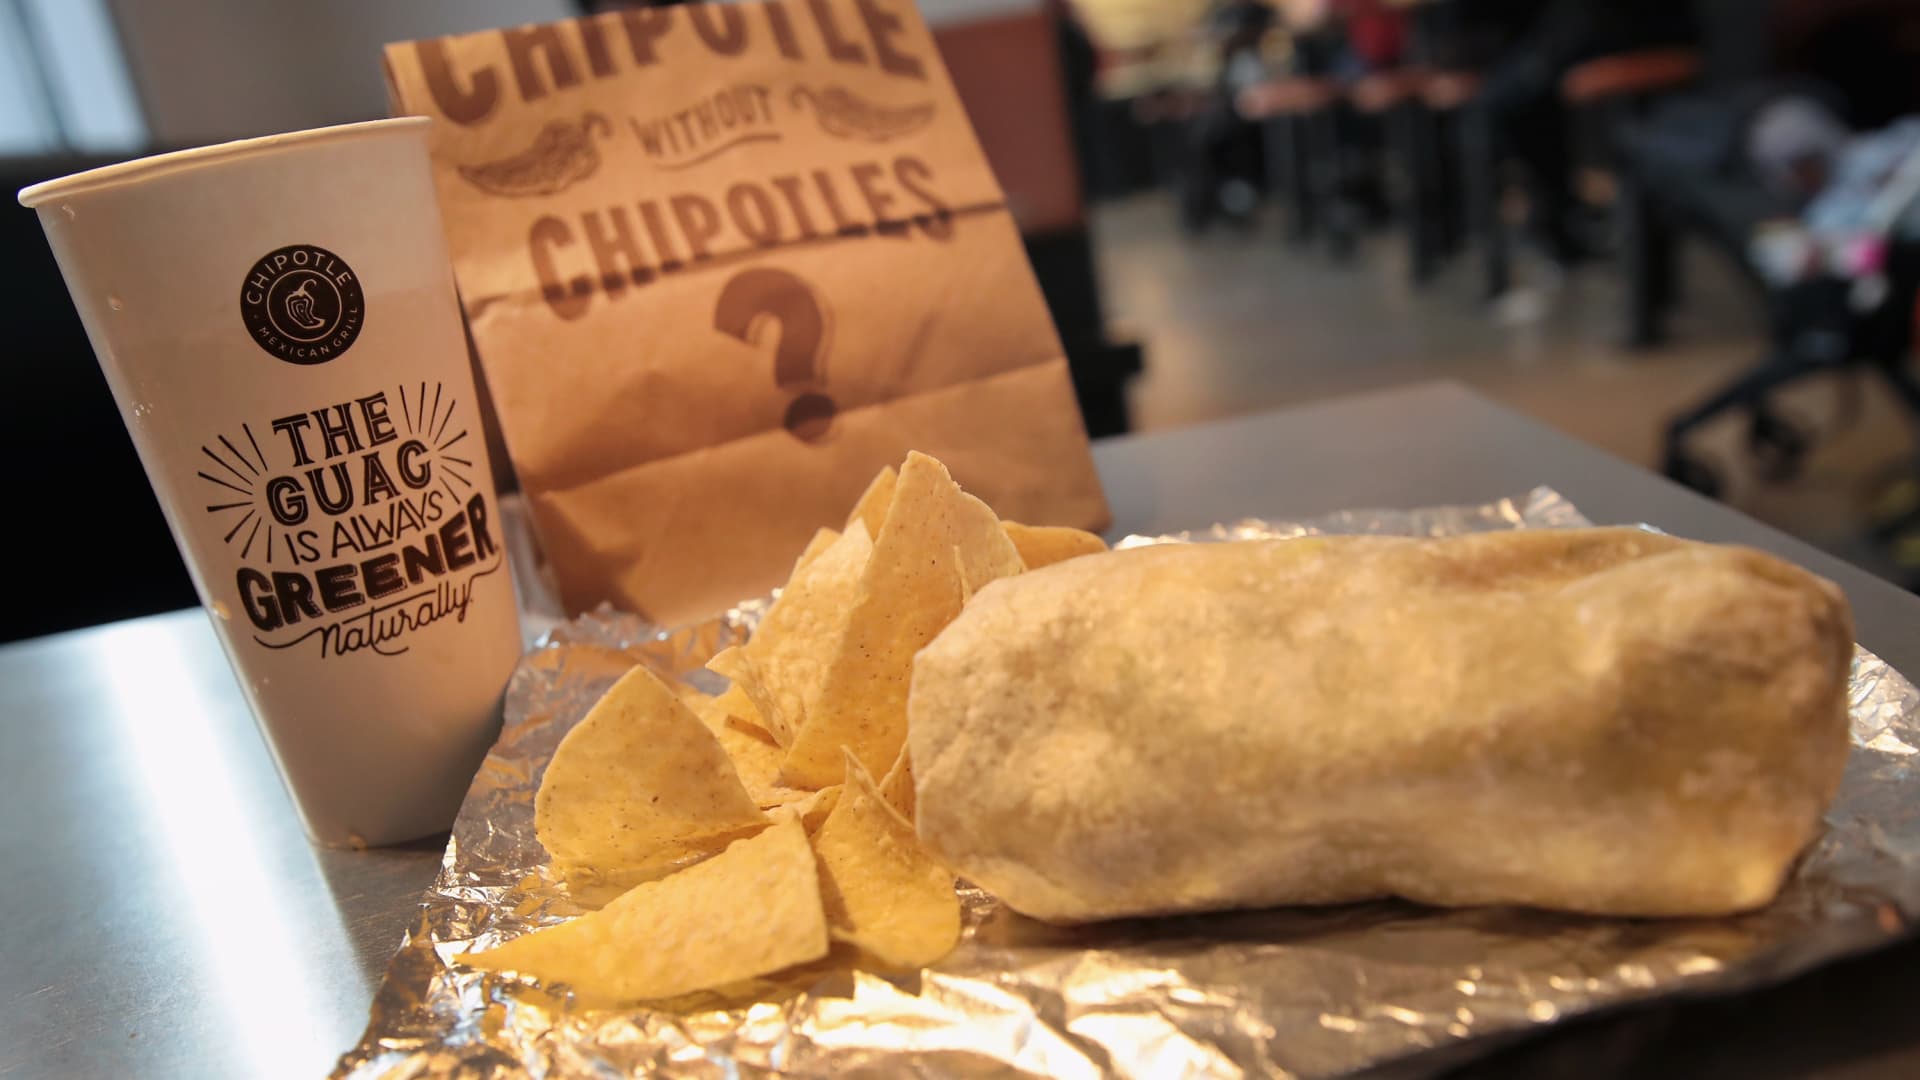 Chipotle Mexican Grill without problems tops earnings estimates, as higher prices again offset food inflation